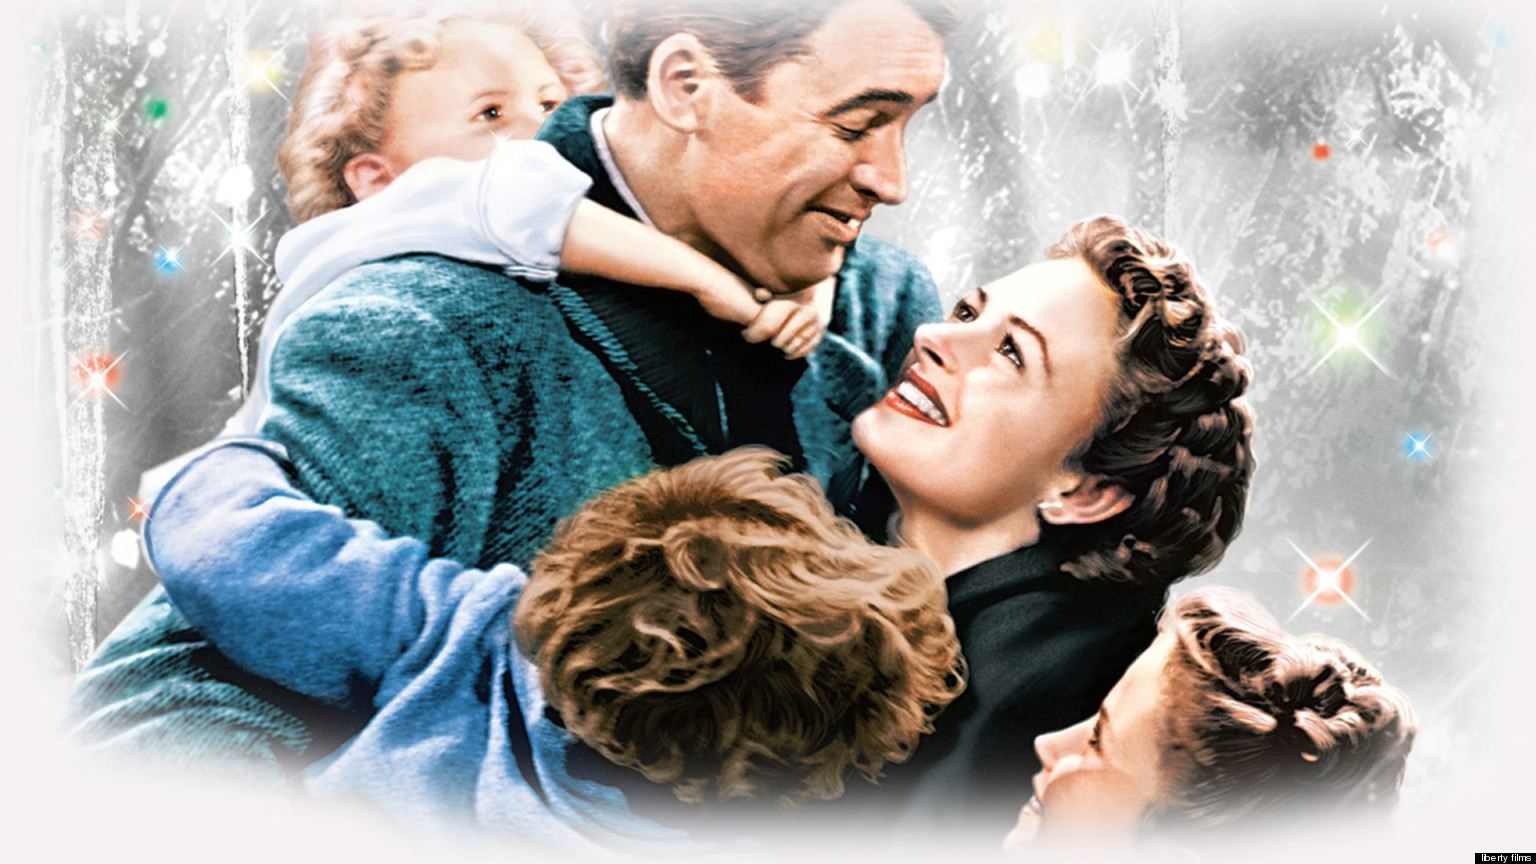 It's a Wonderful Life Review